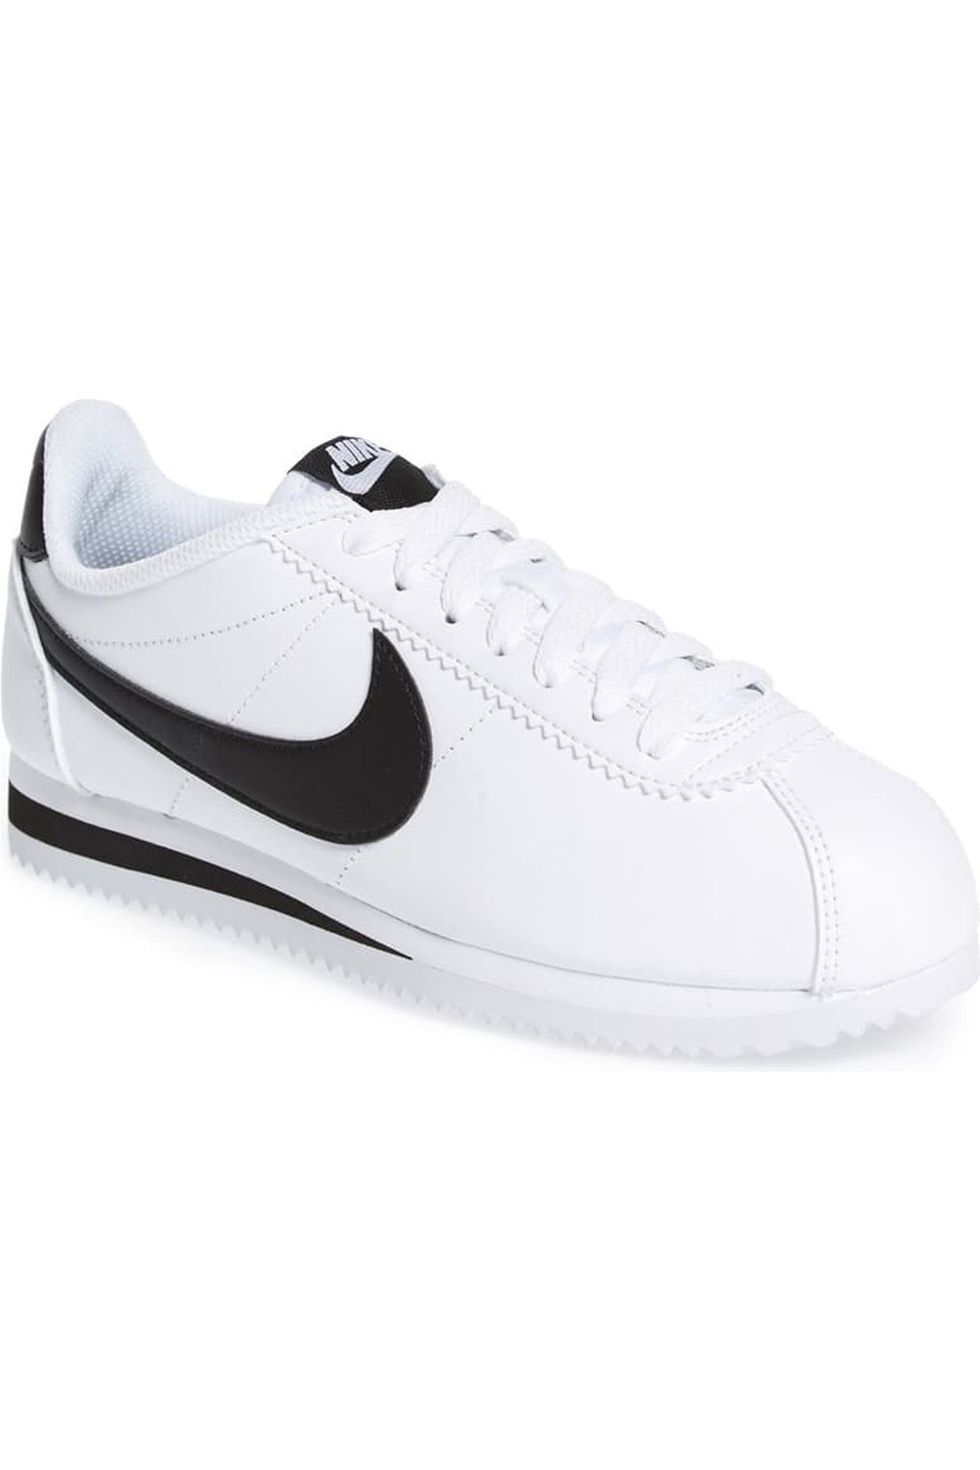 Nike Cortez Luis Vuiton* Sneakers in Nairobi Central - Shoes, Jobri  Collection